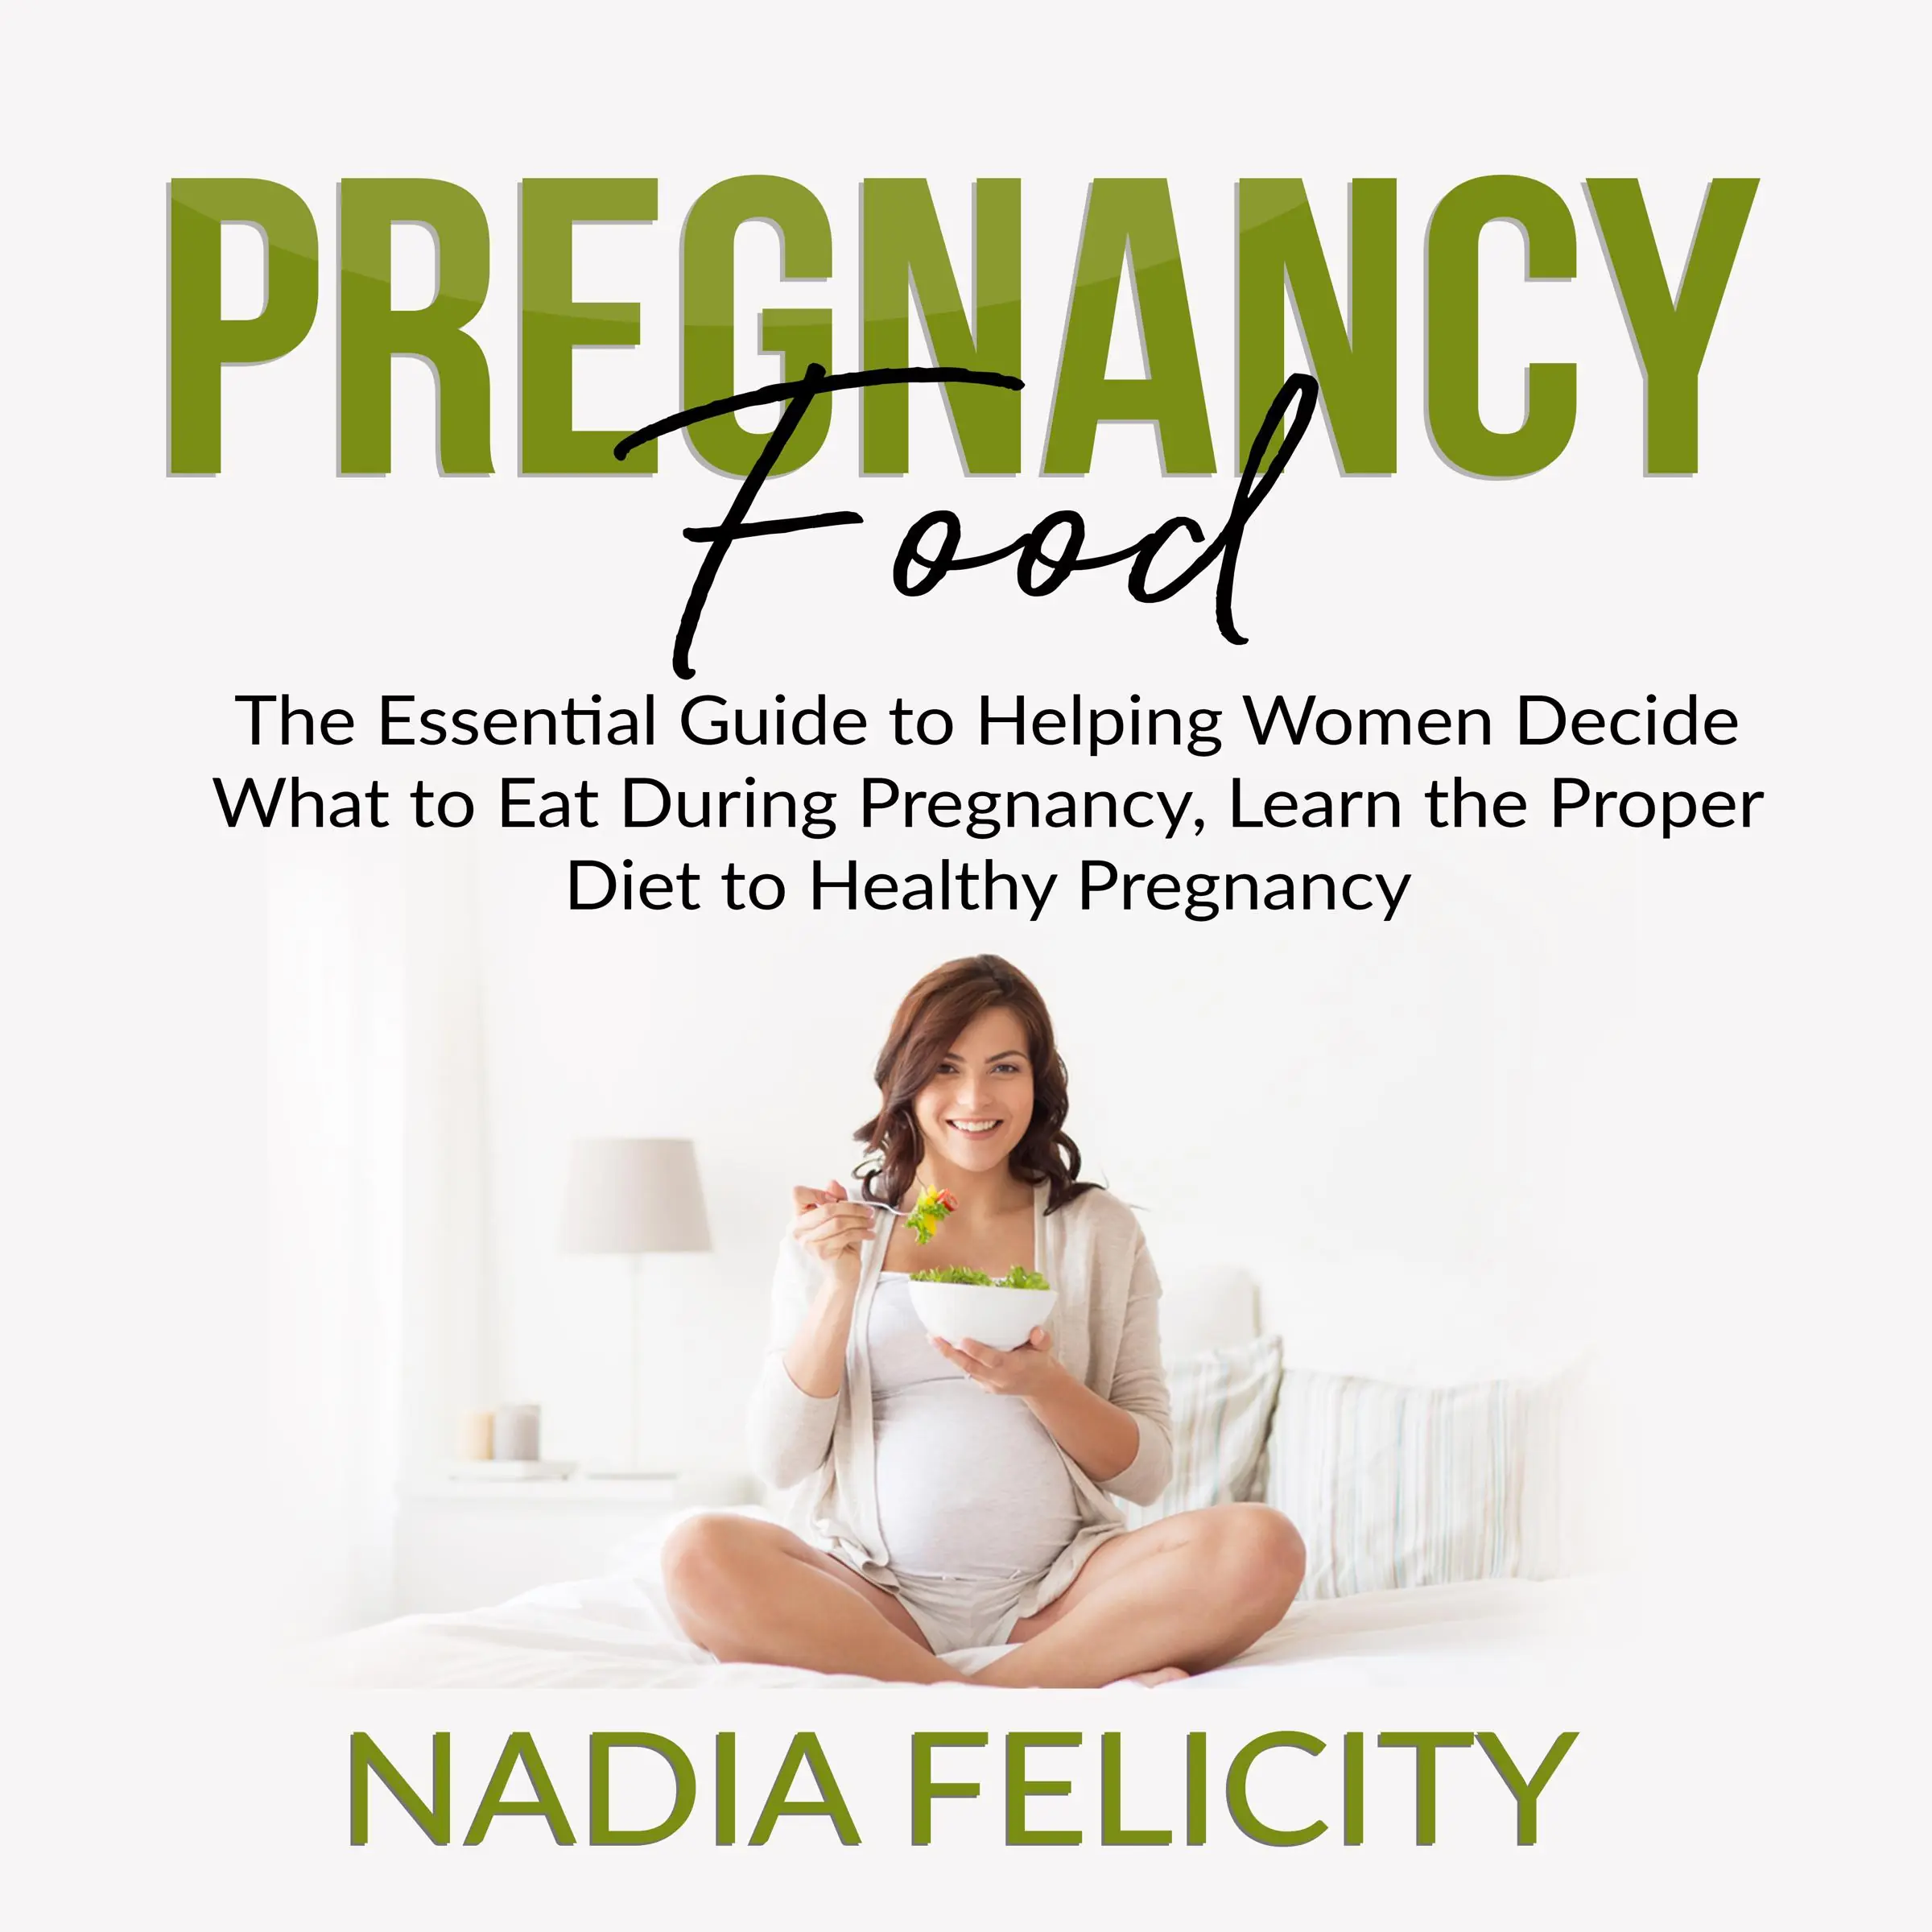 Pregnancy Food: The Essential Guide to Helping Women Decide What to Eat During Pregnancy, Learn the Proper Diet to Healthy Pregnancy by Nadia Felicity